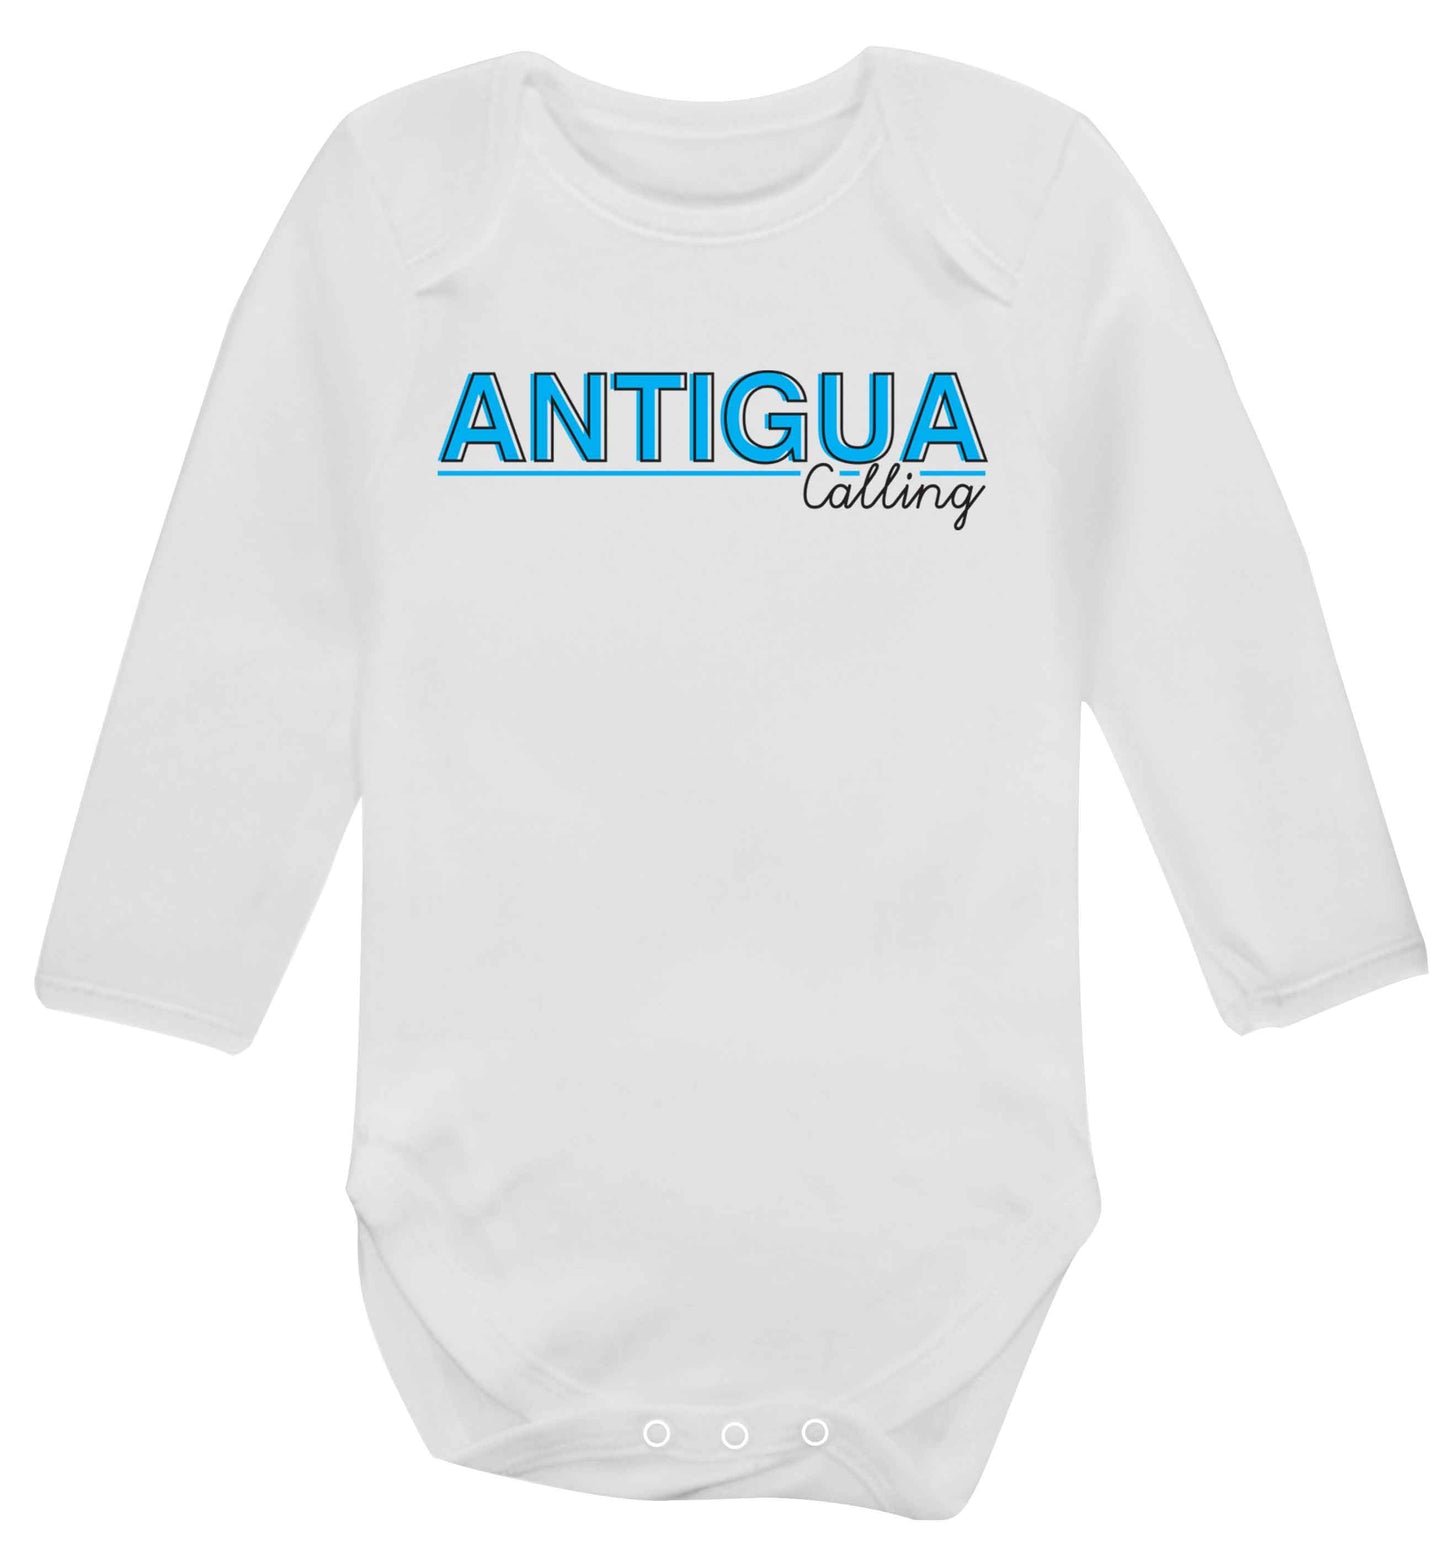 Antigua calling Baby Vest long sleeved white 6-12 months